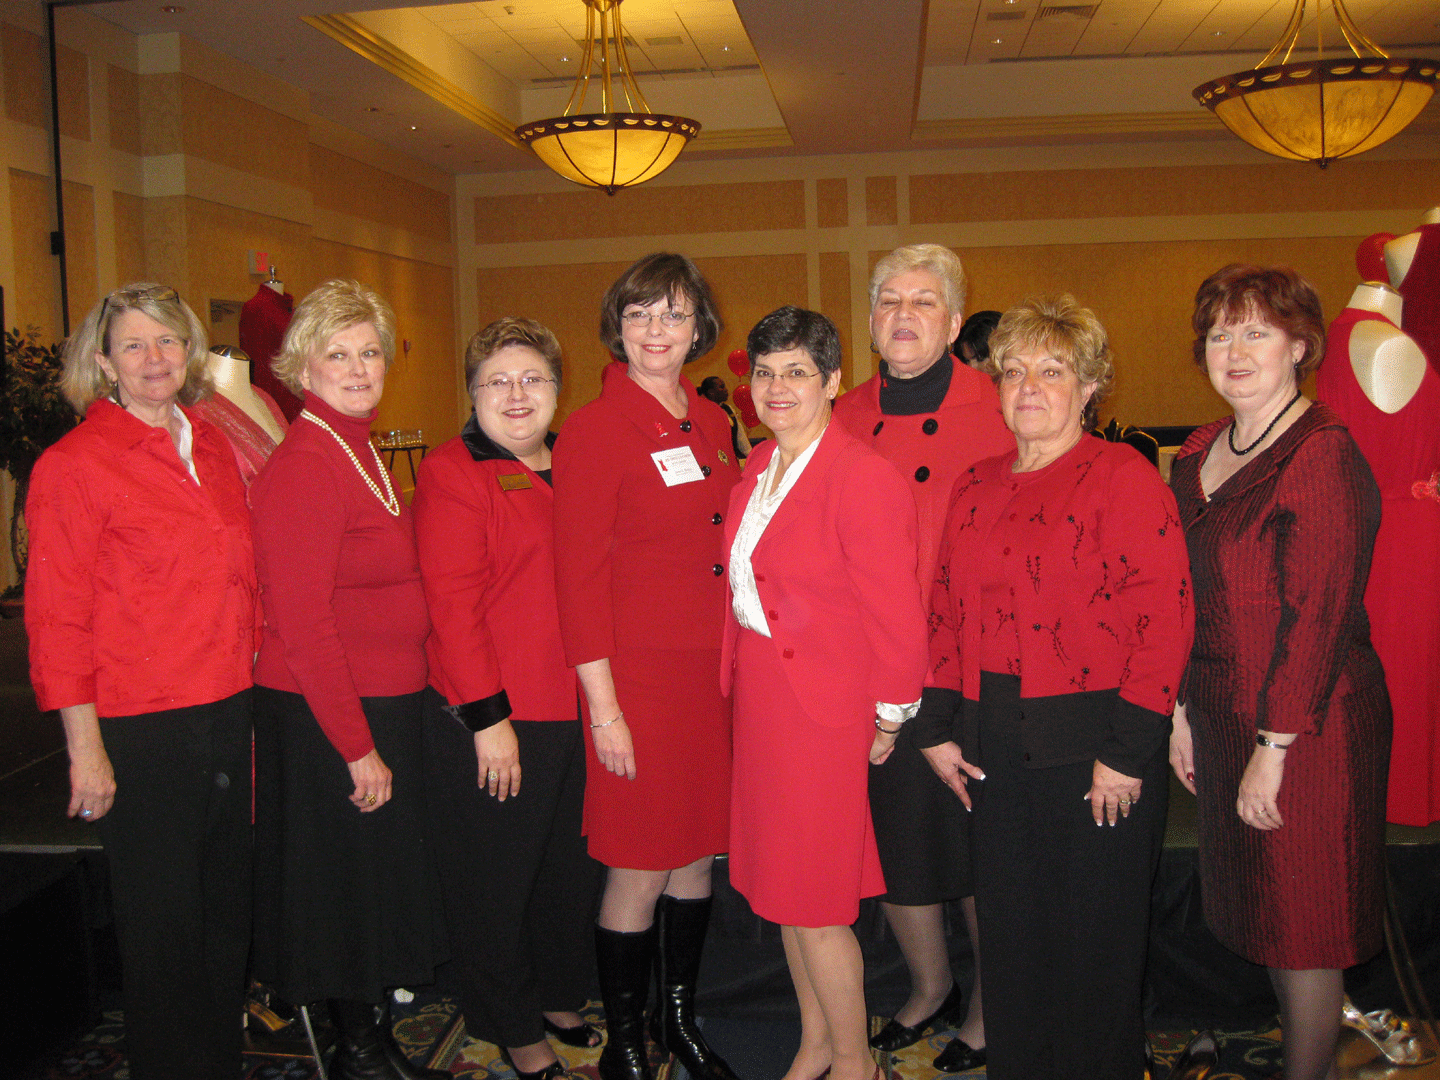 Group photo of women wearing red dresses